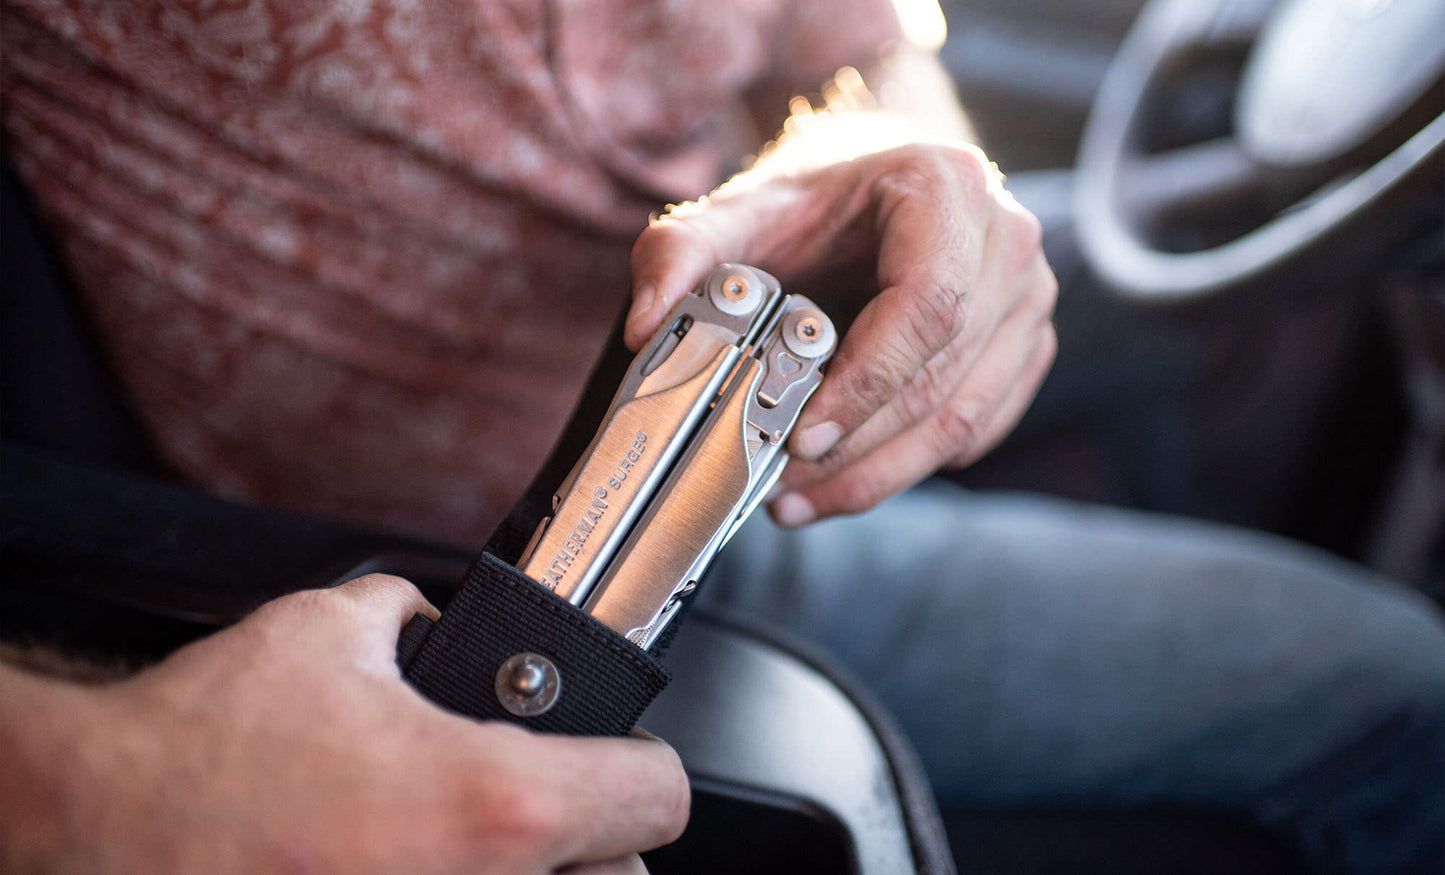 Leatherman Surge® Multi-Tool: The Powerhouse for Every Challenge